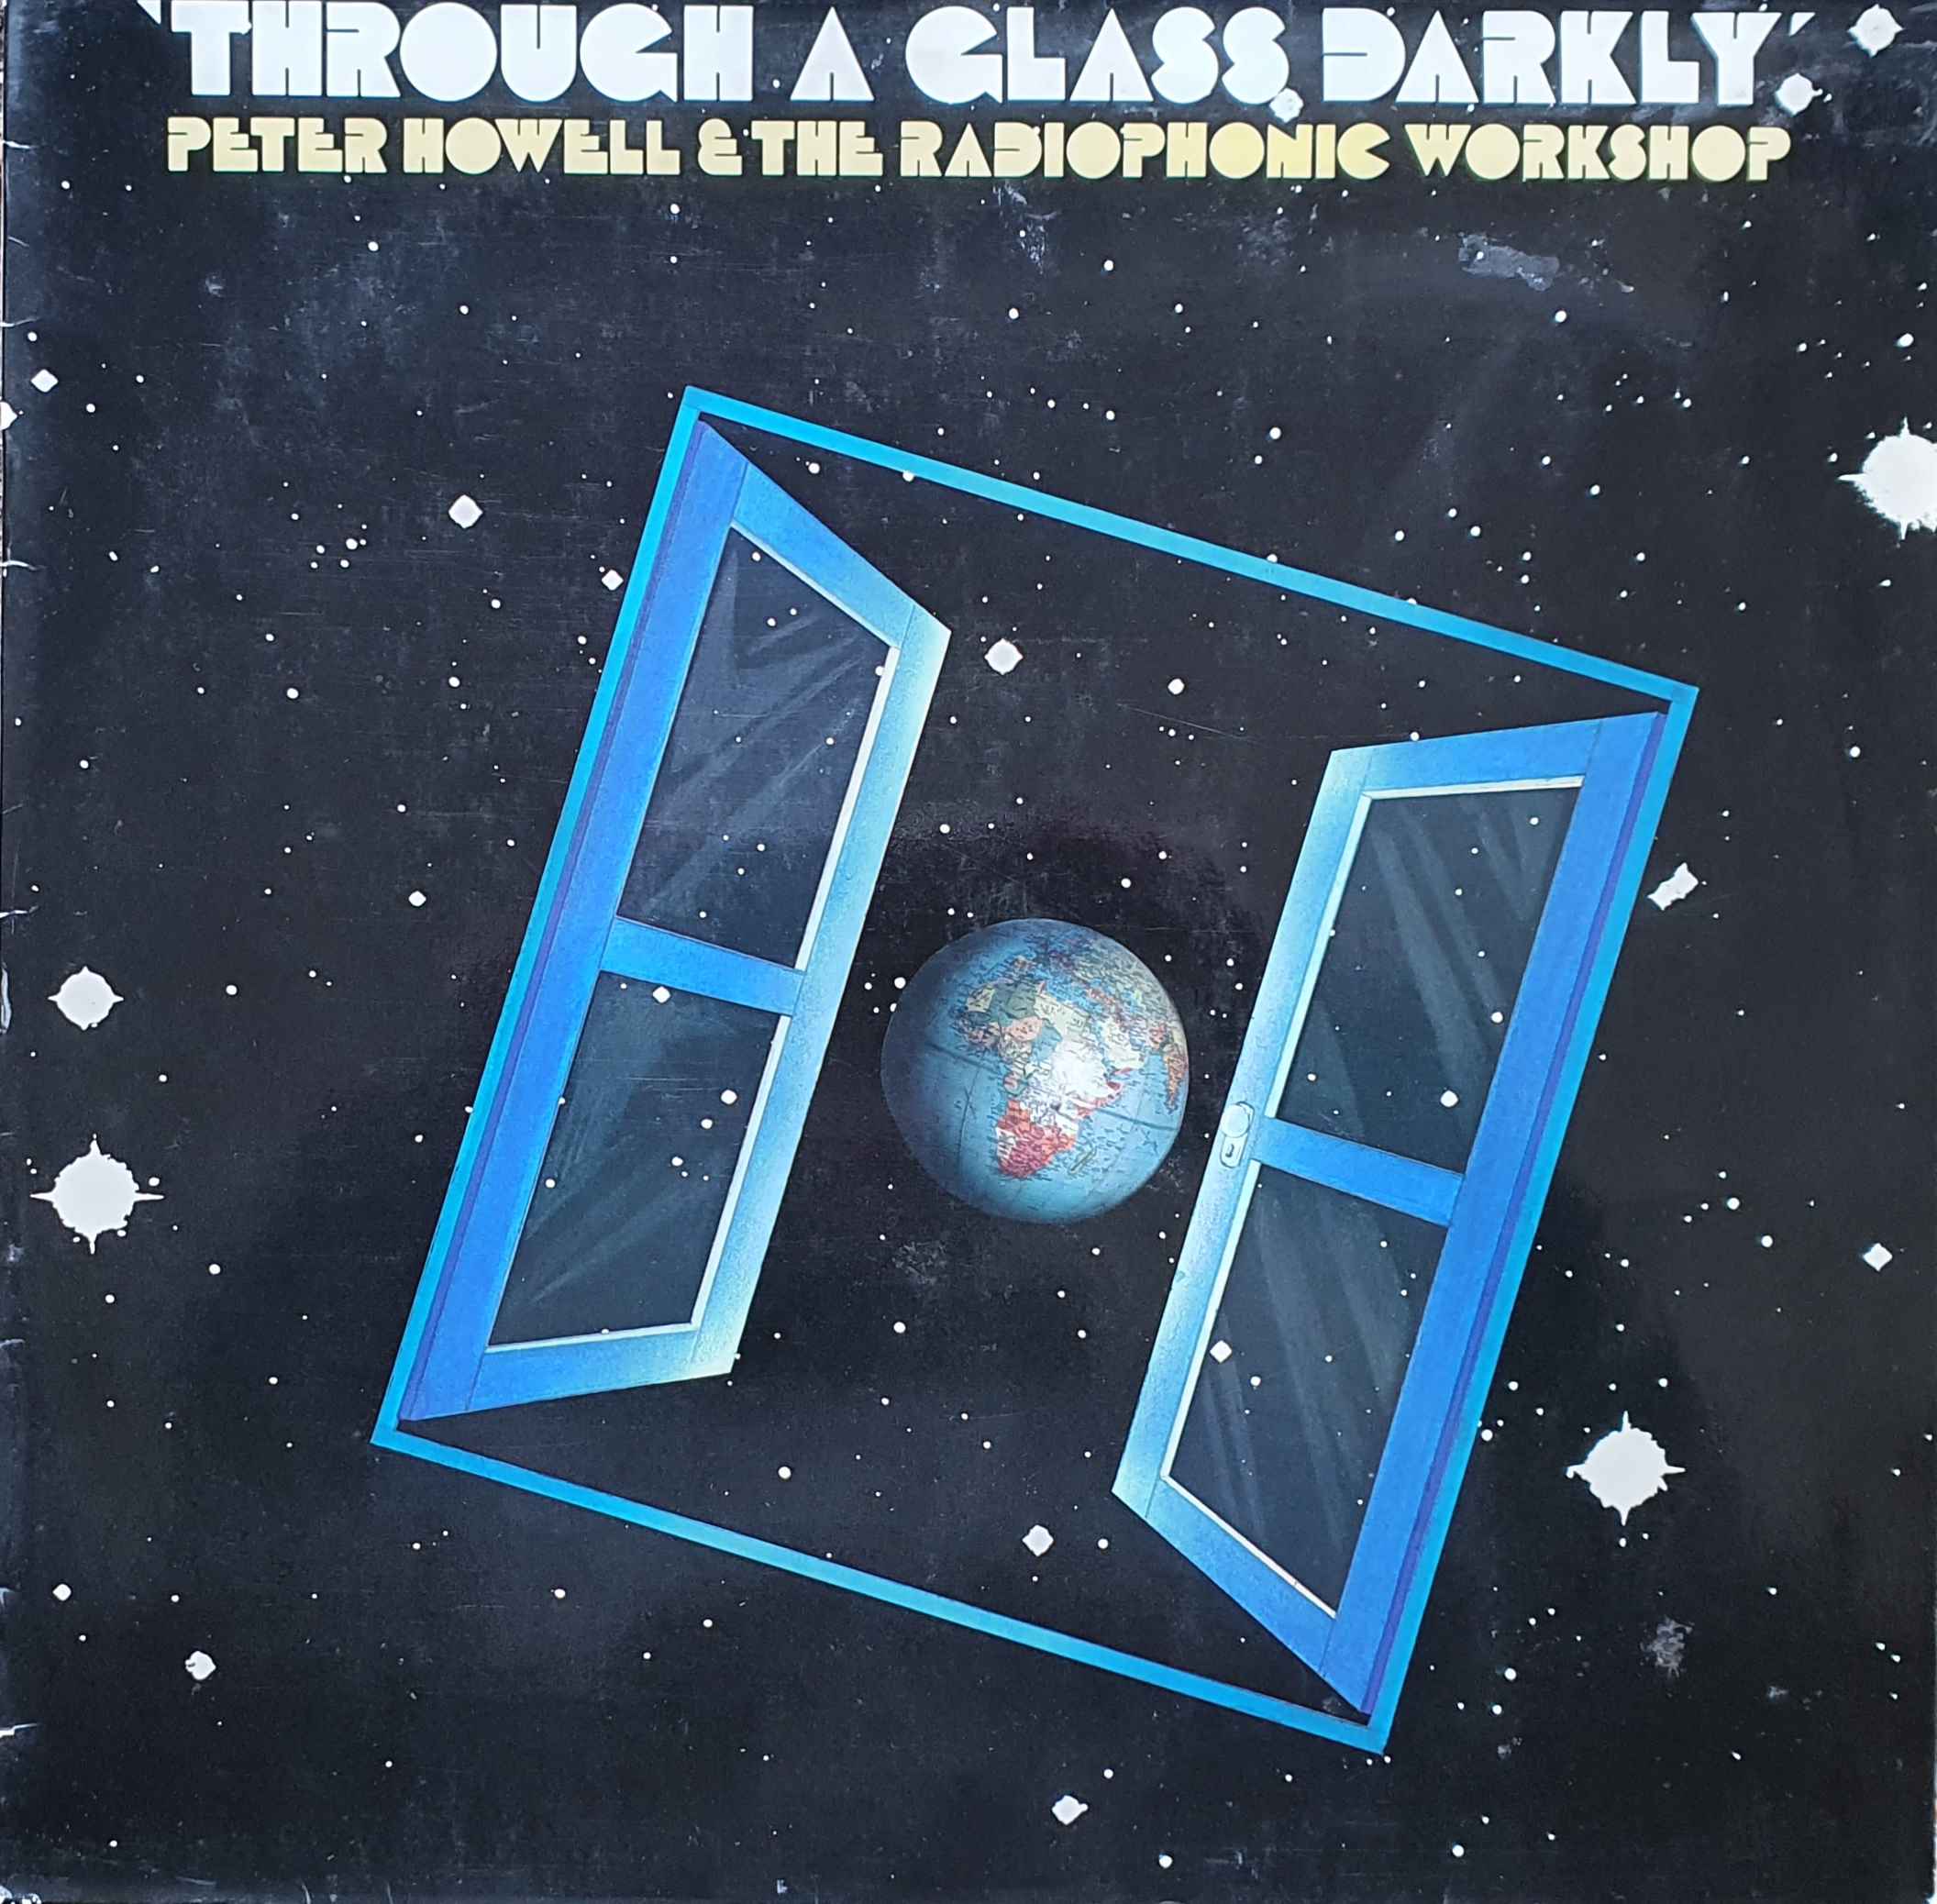 Picture of INT 148.000 Through a glass darkly (German import) by artist Peter Howell and the Radiophonic Workshop from the BBC albums - Records and Tapes library